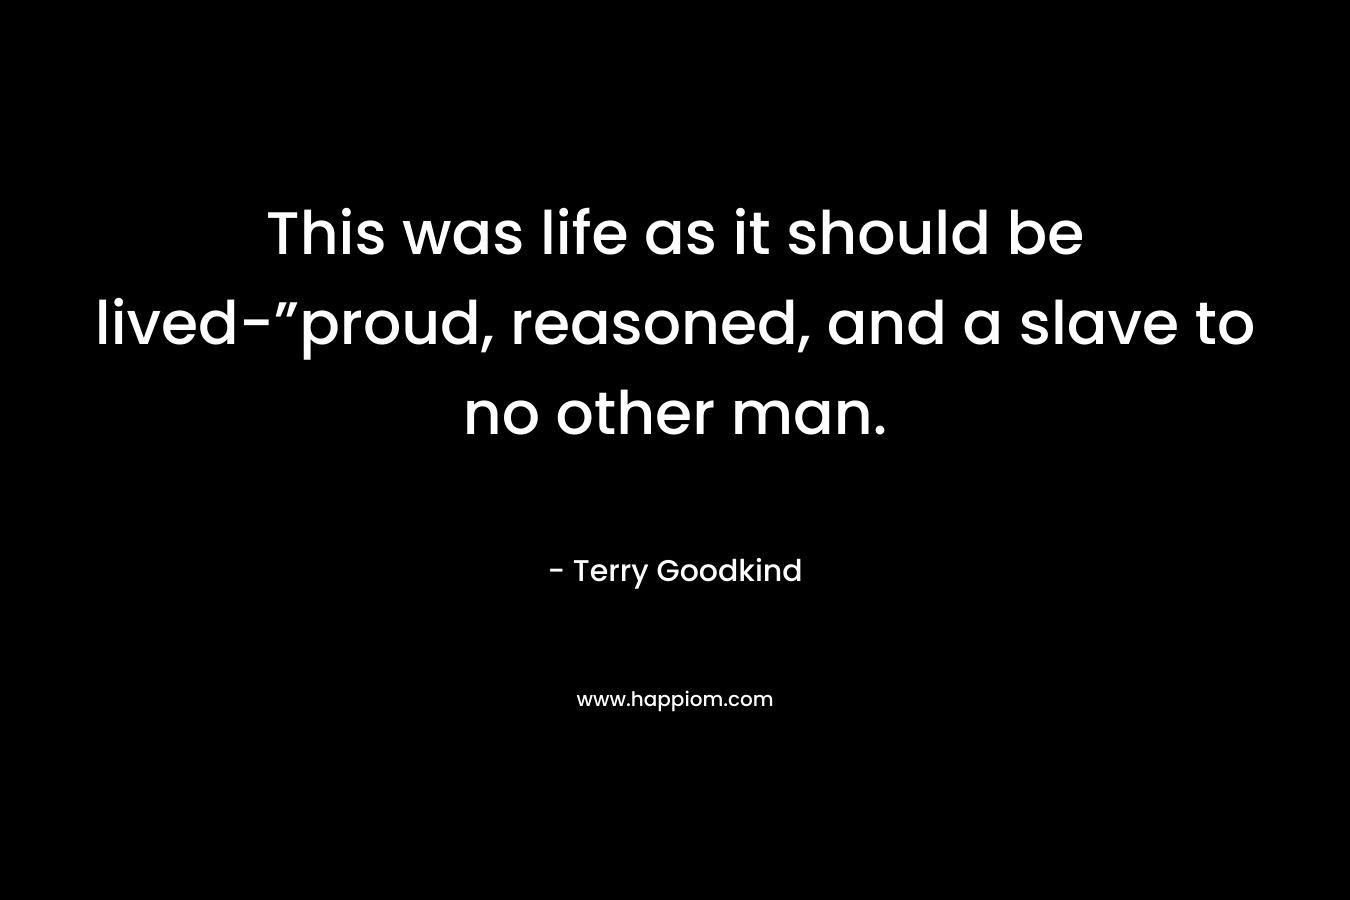 This was life as it should be lived-”proud, reasoned, and a slave to no other man.